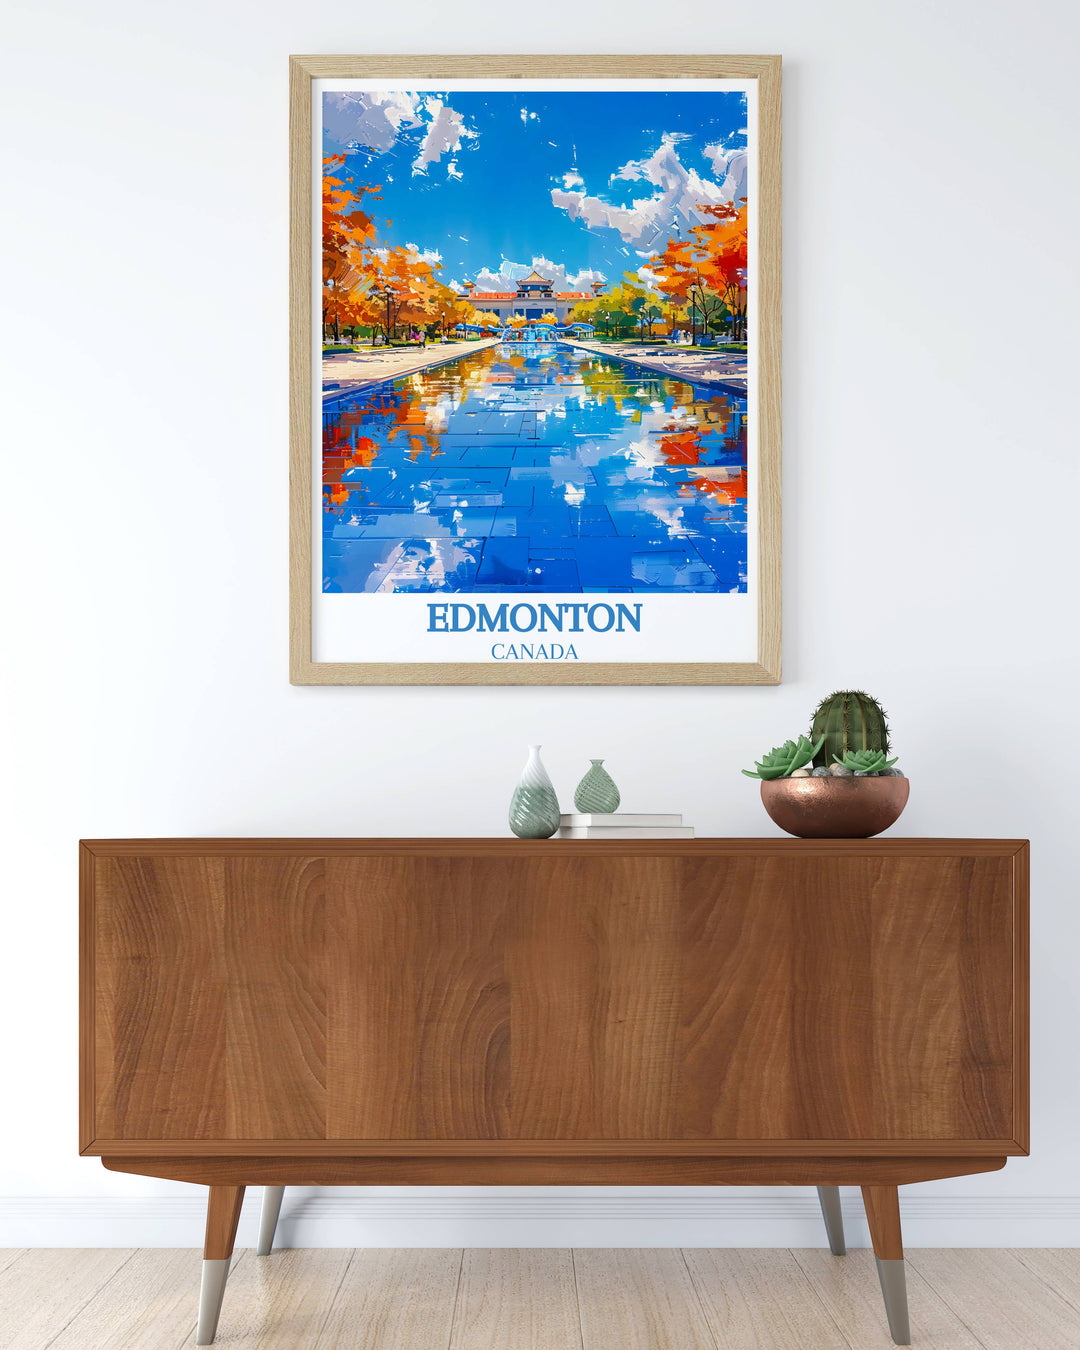 Stunning Canada City Photo Wall Art from MapYourDreams, capturing Edmonton’s snowy river valley, ideal for bringing natural beauty into your living space.